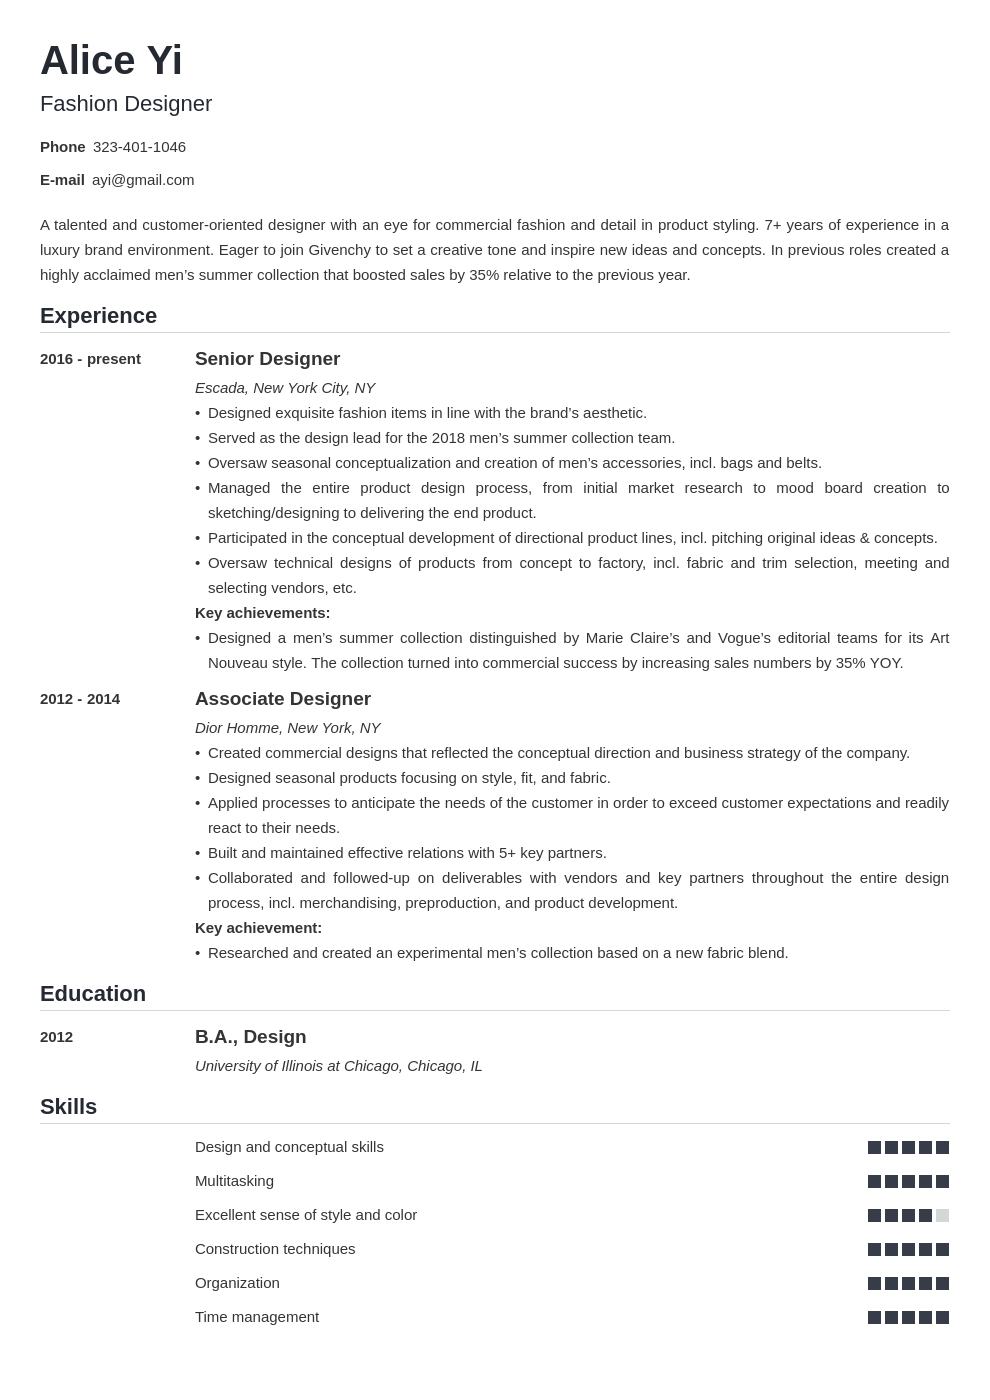 Resume Format For Fashion Designer from cdn-images.zety.com